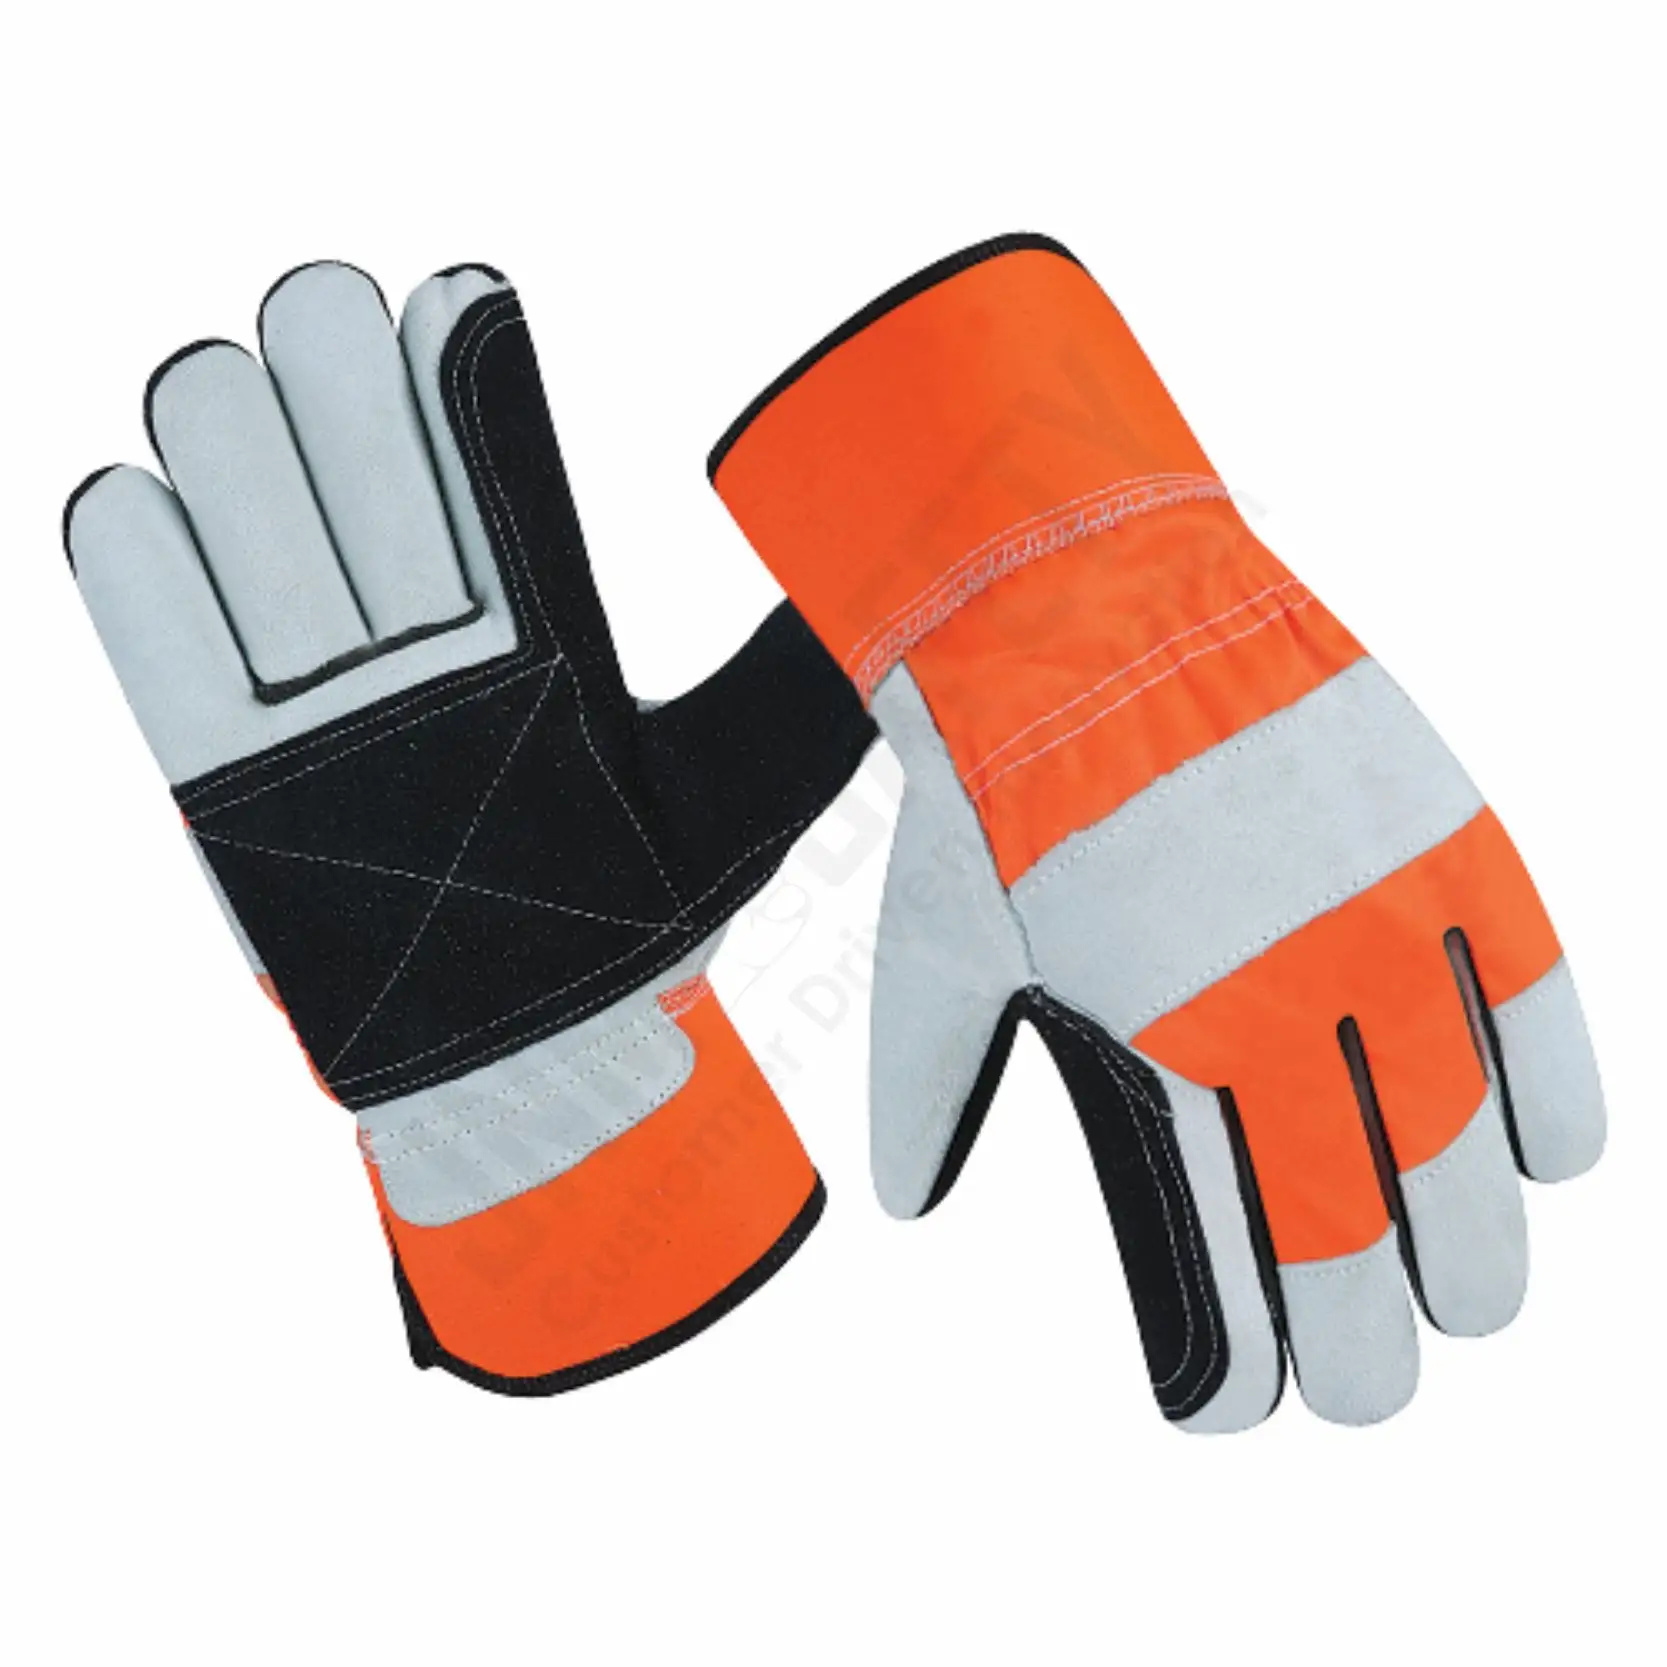 Reinforced Fluorescent Cotton Leather Working Gloves Safety Work Gloves Cowhide Split Leather Industrial Canadian Rigger Gloves